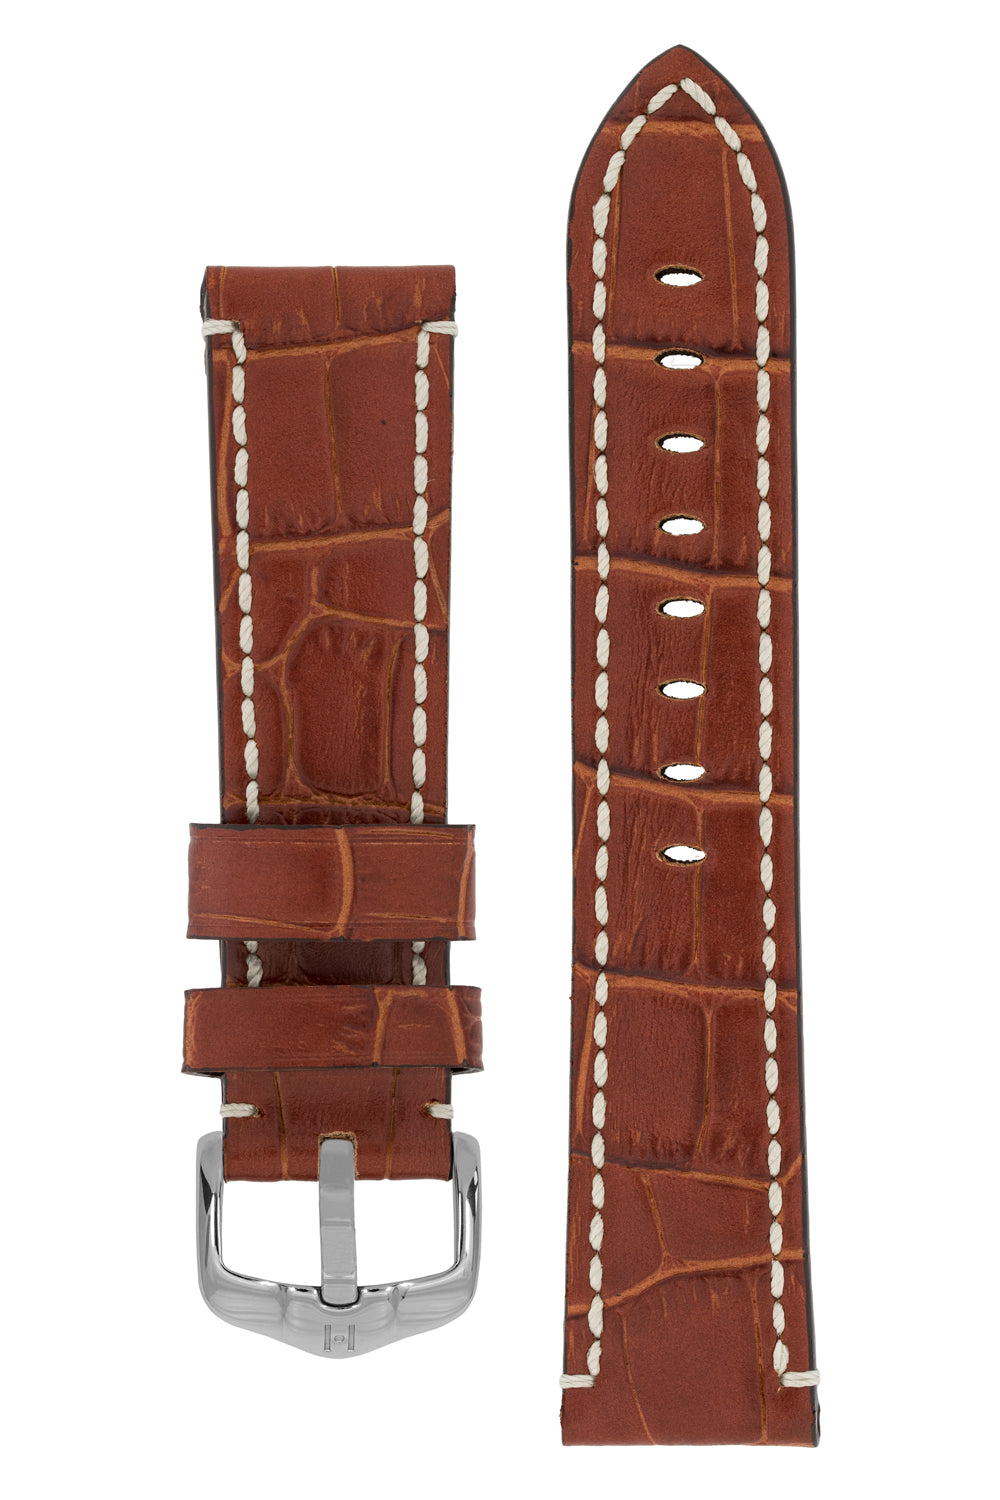 Hirsch Knight Alligator Embossed Leather Watch Strap in Gold Brown (with Polished Silver Steel H-Active Buckle)